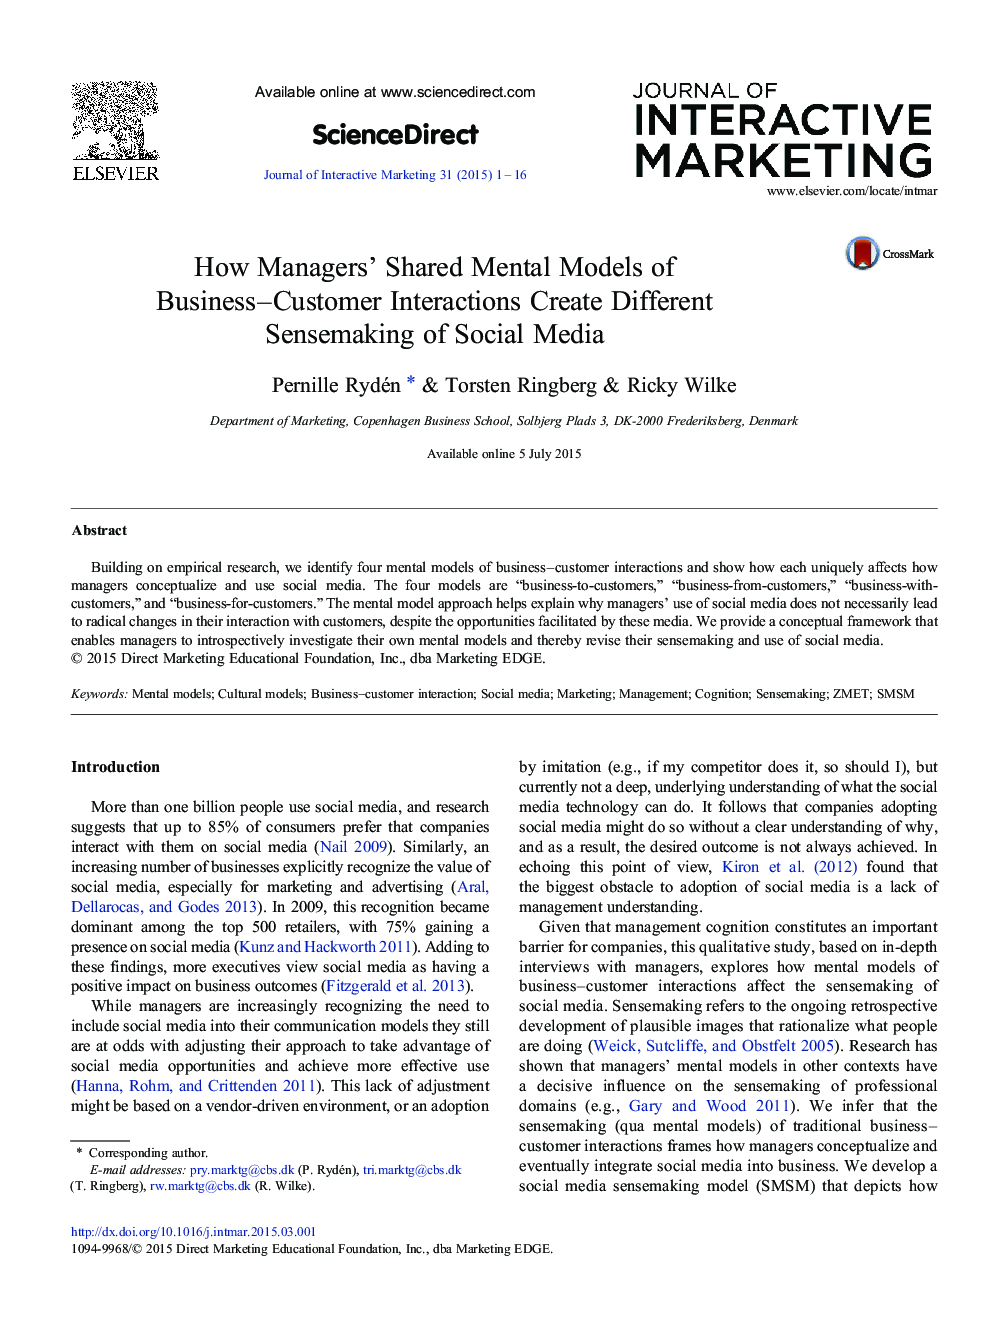 How Managers' Shared Mental Models of Business–Customer Interactions Create Different Sensemaking of Social Media